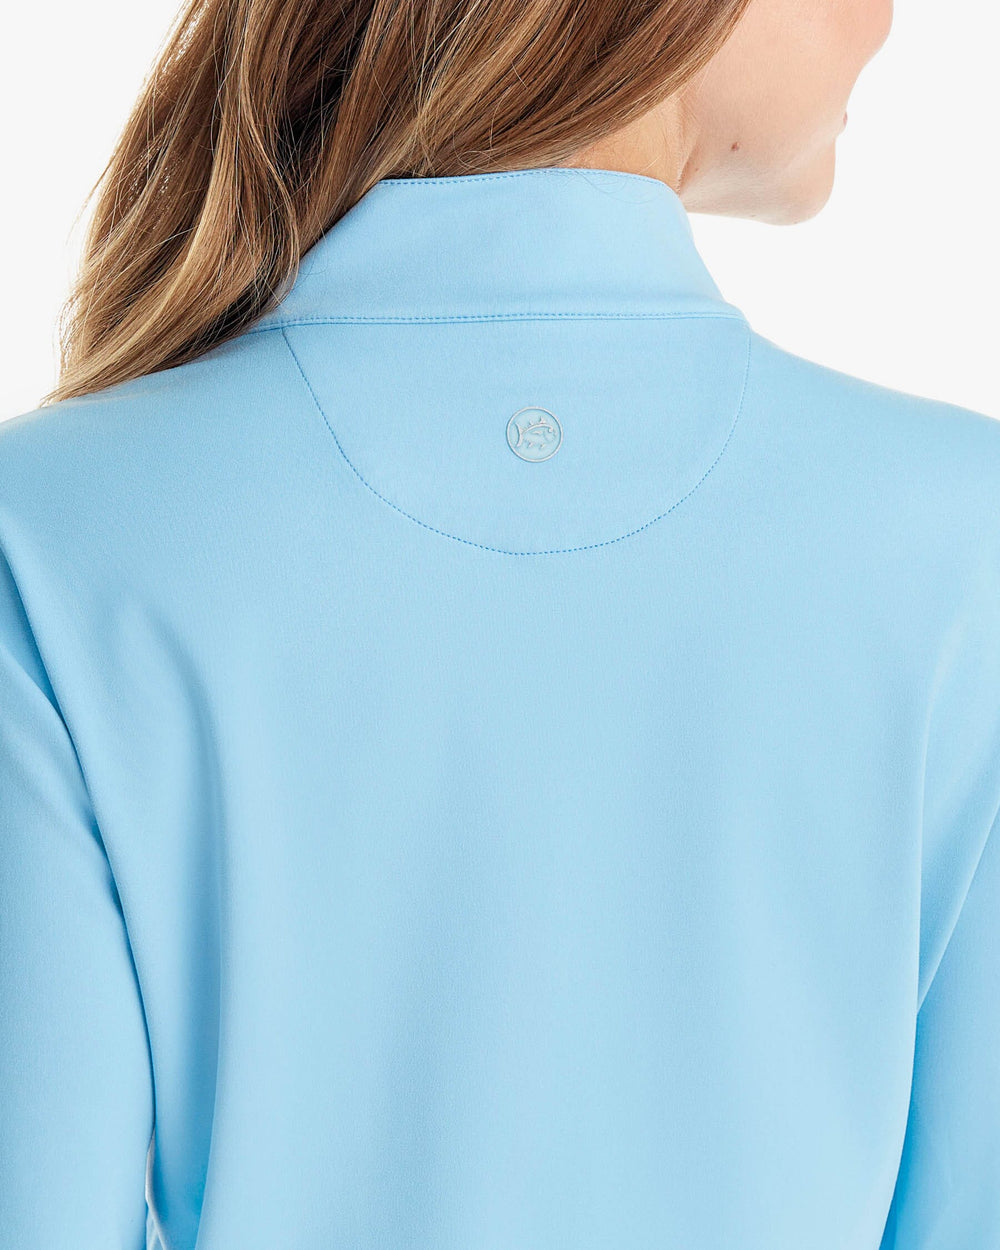 The back view of the Southern Tide Josette Mixed Media Full Zip Jacket by Southern Tide - Sky Blue